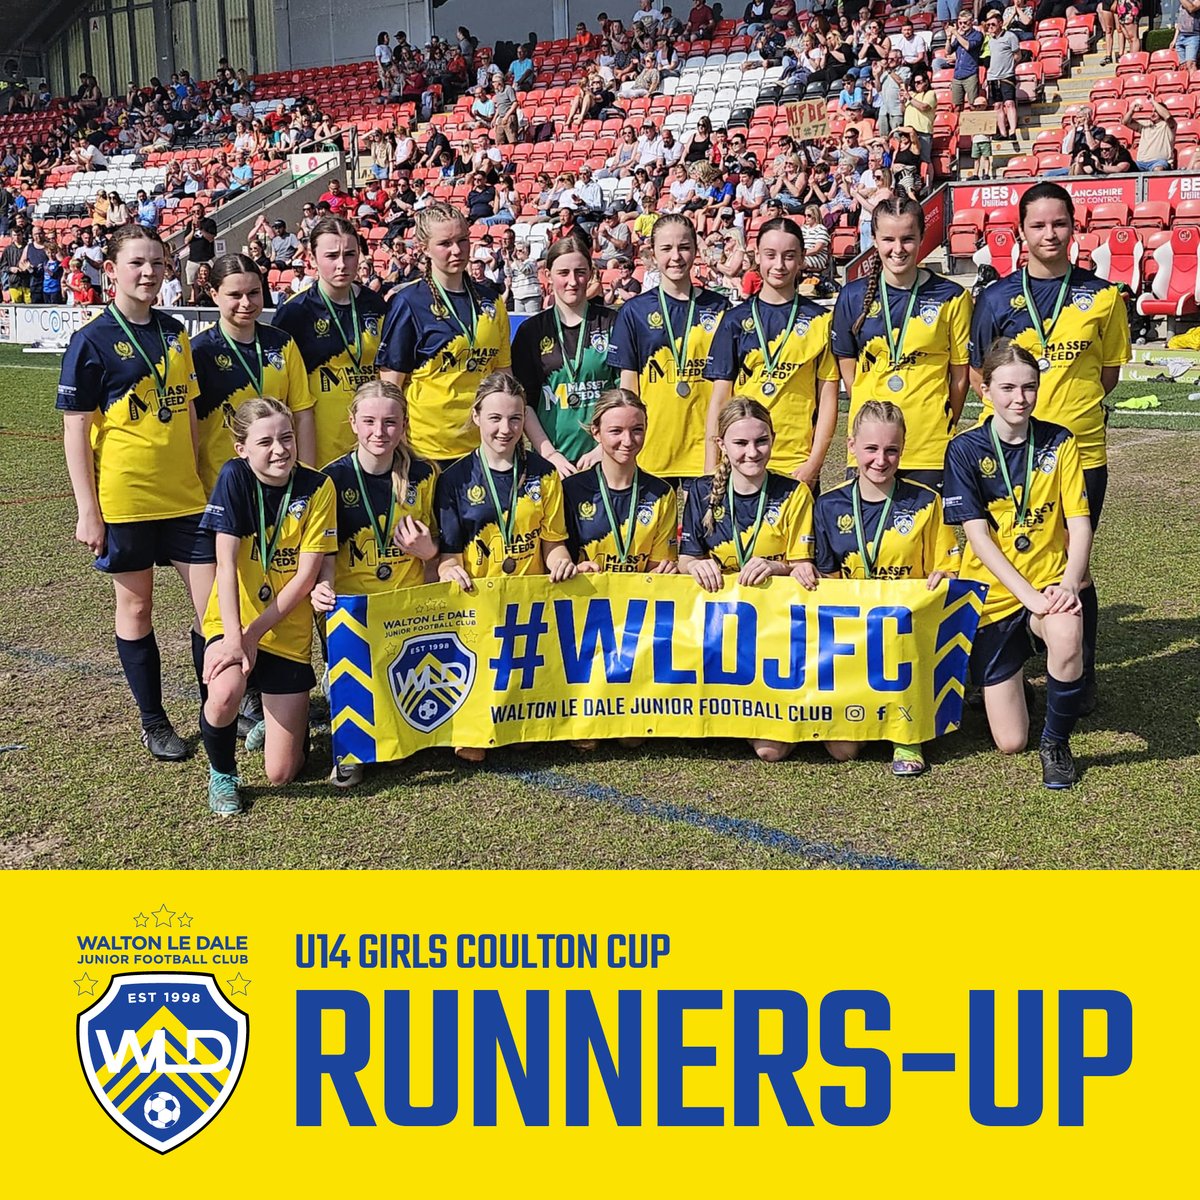 Today we're sending a big shout out to our U14 girls who finished as Coulton Cup runners-up in a closely-fought final at @ftfc's Highbury Stadium. They were a credit to WLD and after their huge progress this year we know there'll be many more special occasions to come! 💛⚽️💪